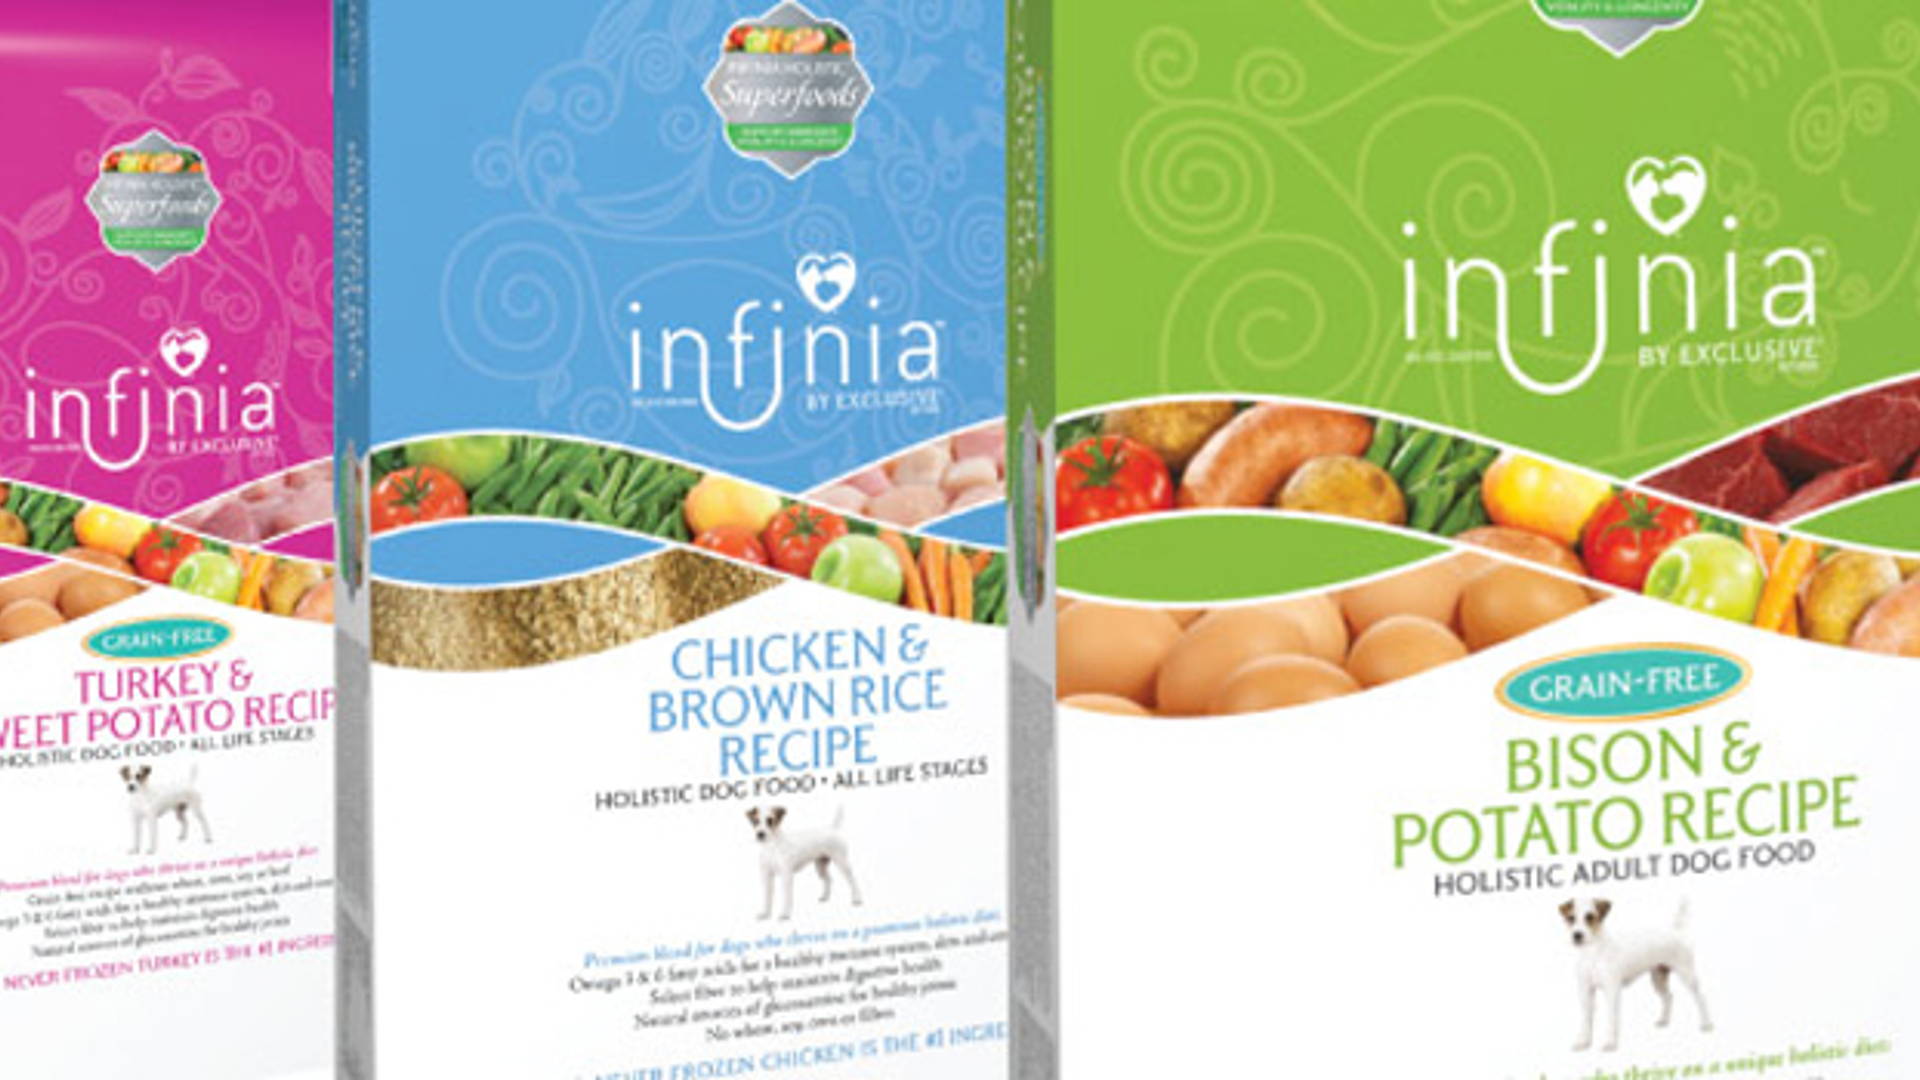 Featured image for Infinia Holistic Dog Food